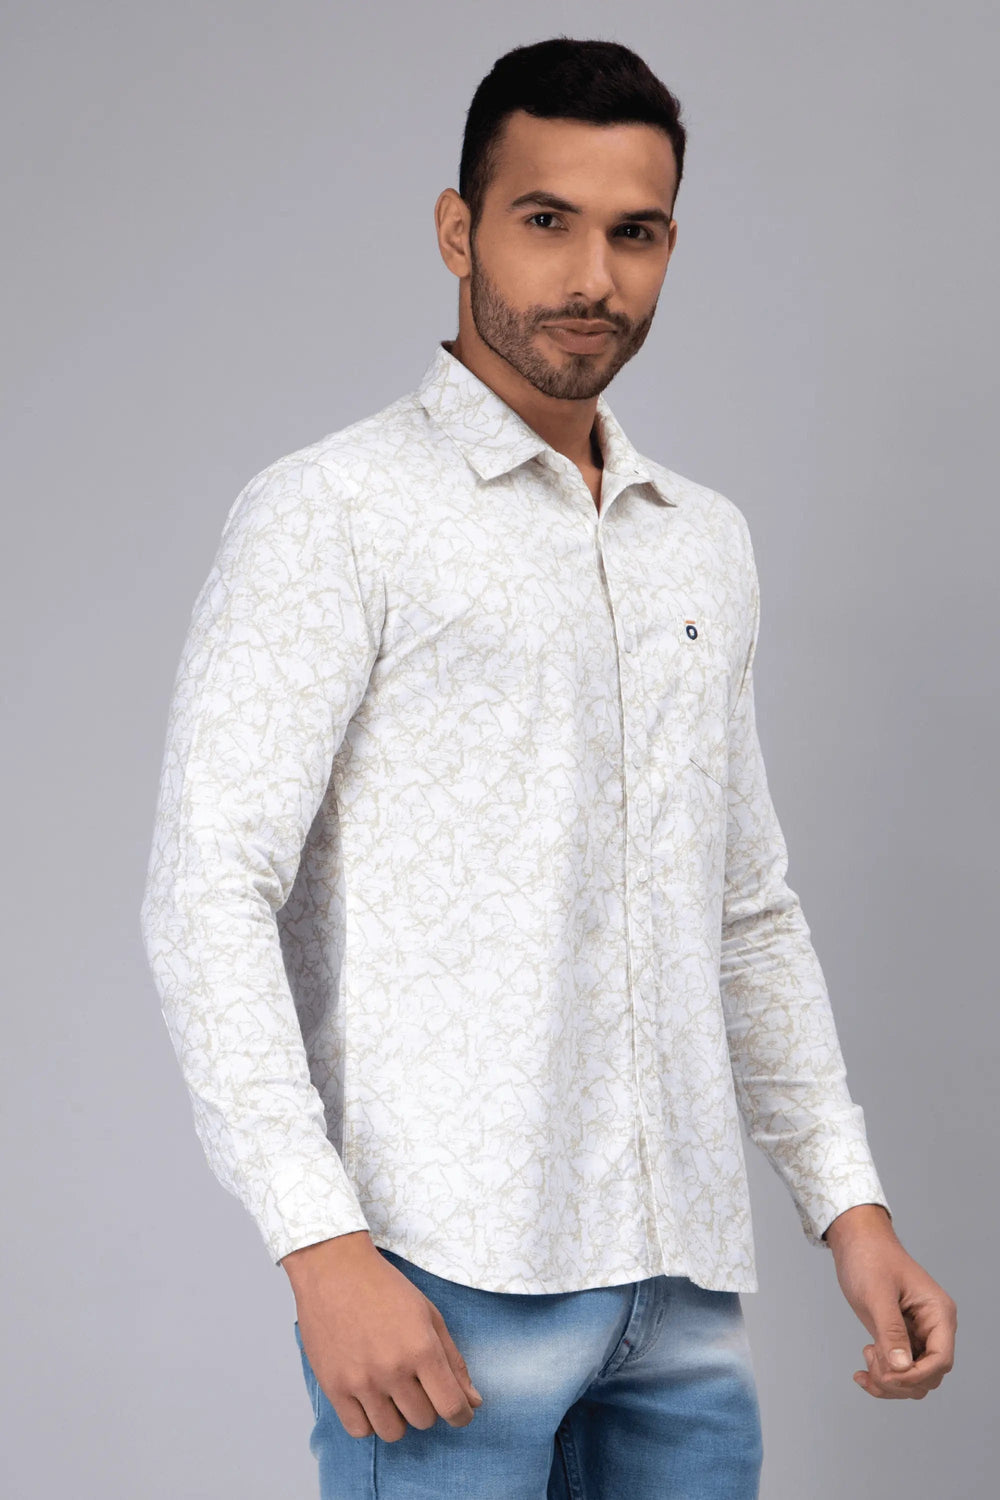 Regular Fit Cotton White Printed Casual Shirt For Men - Peplos Jeans 